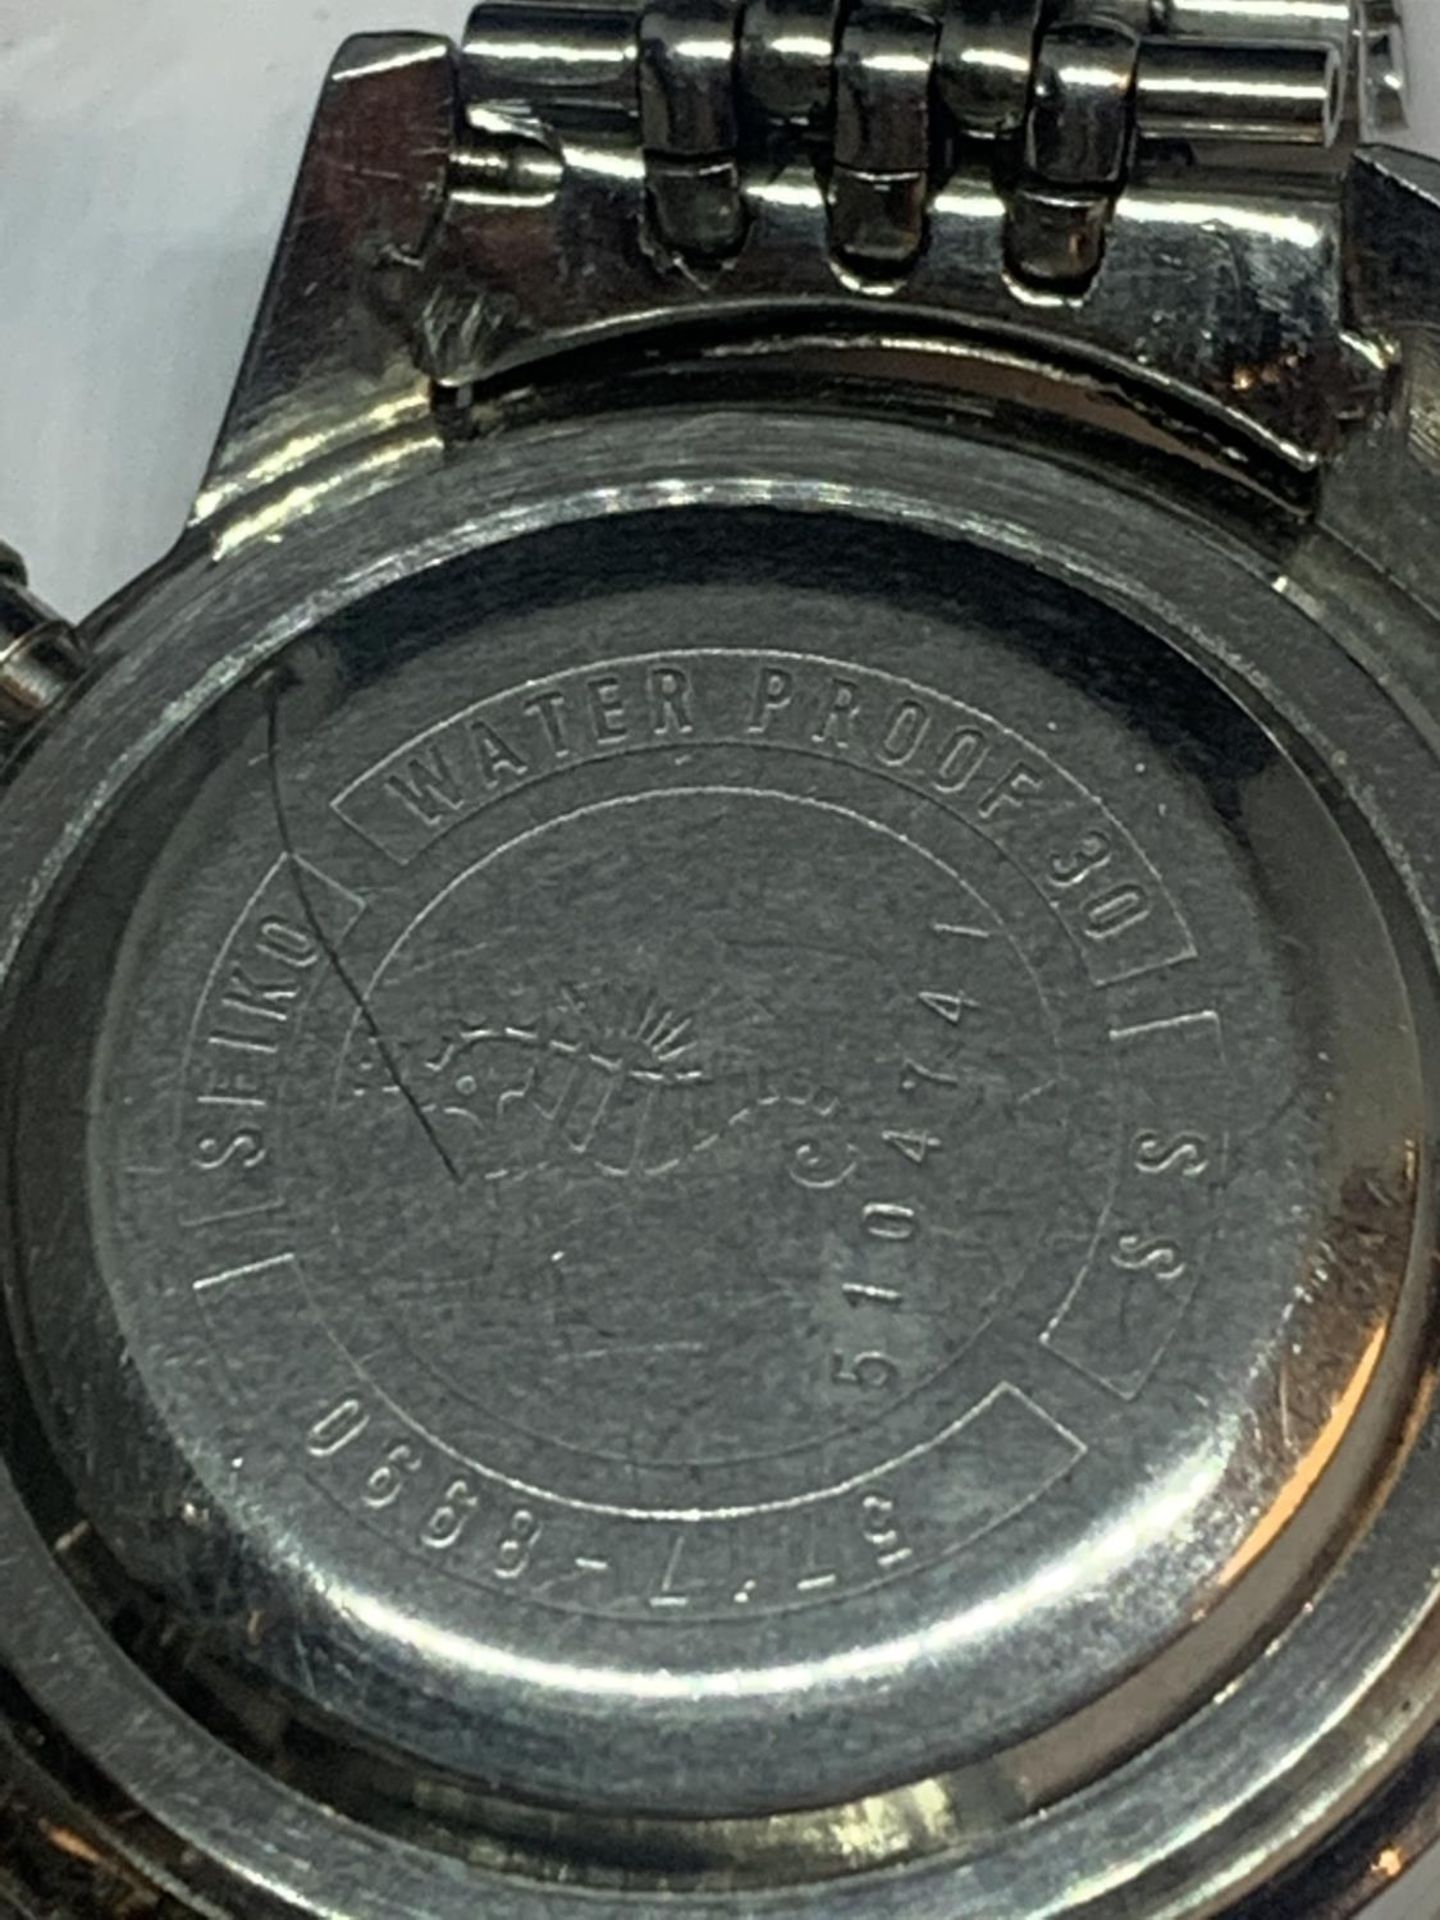 A SEIKO MONOPUSHER CHRONOGRAPH WATCH 5717-8990 SEEN WORKING BUT NO WARRANTY - Image 4 of 4